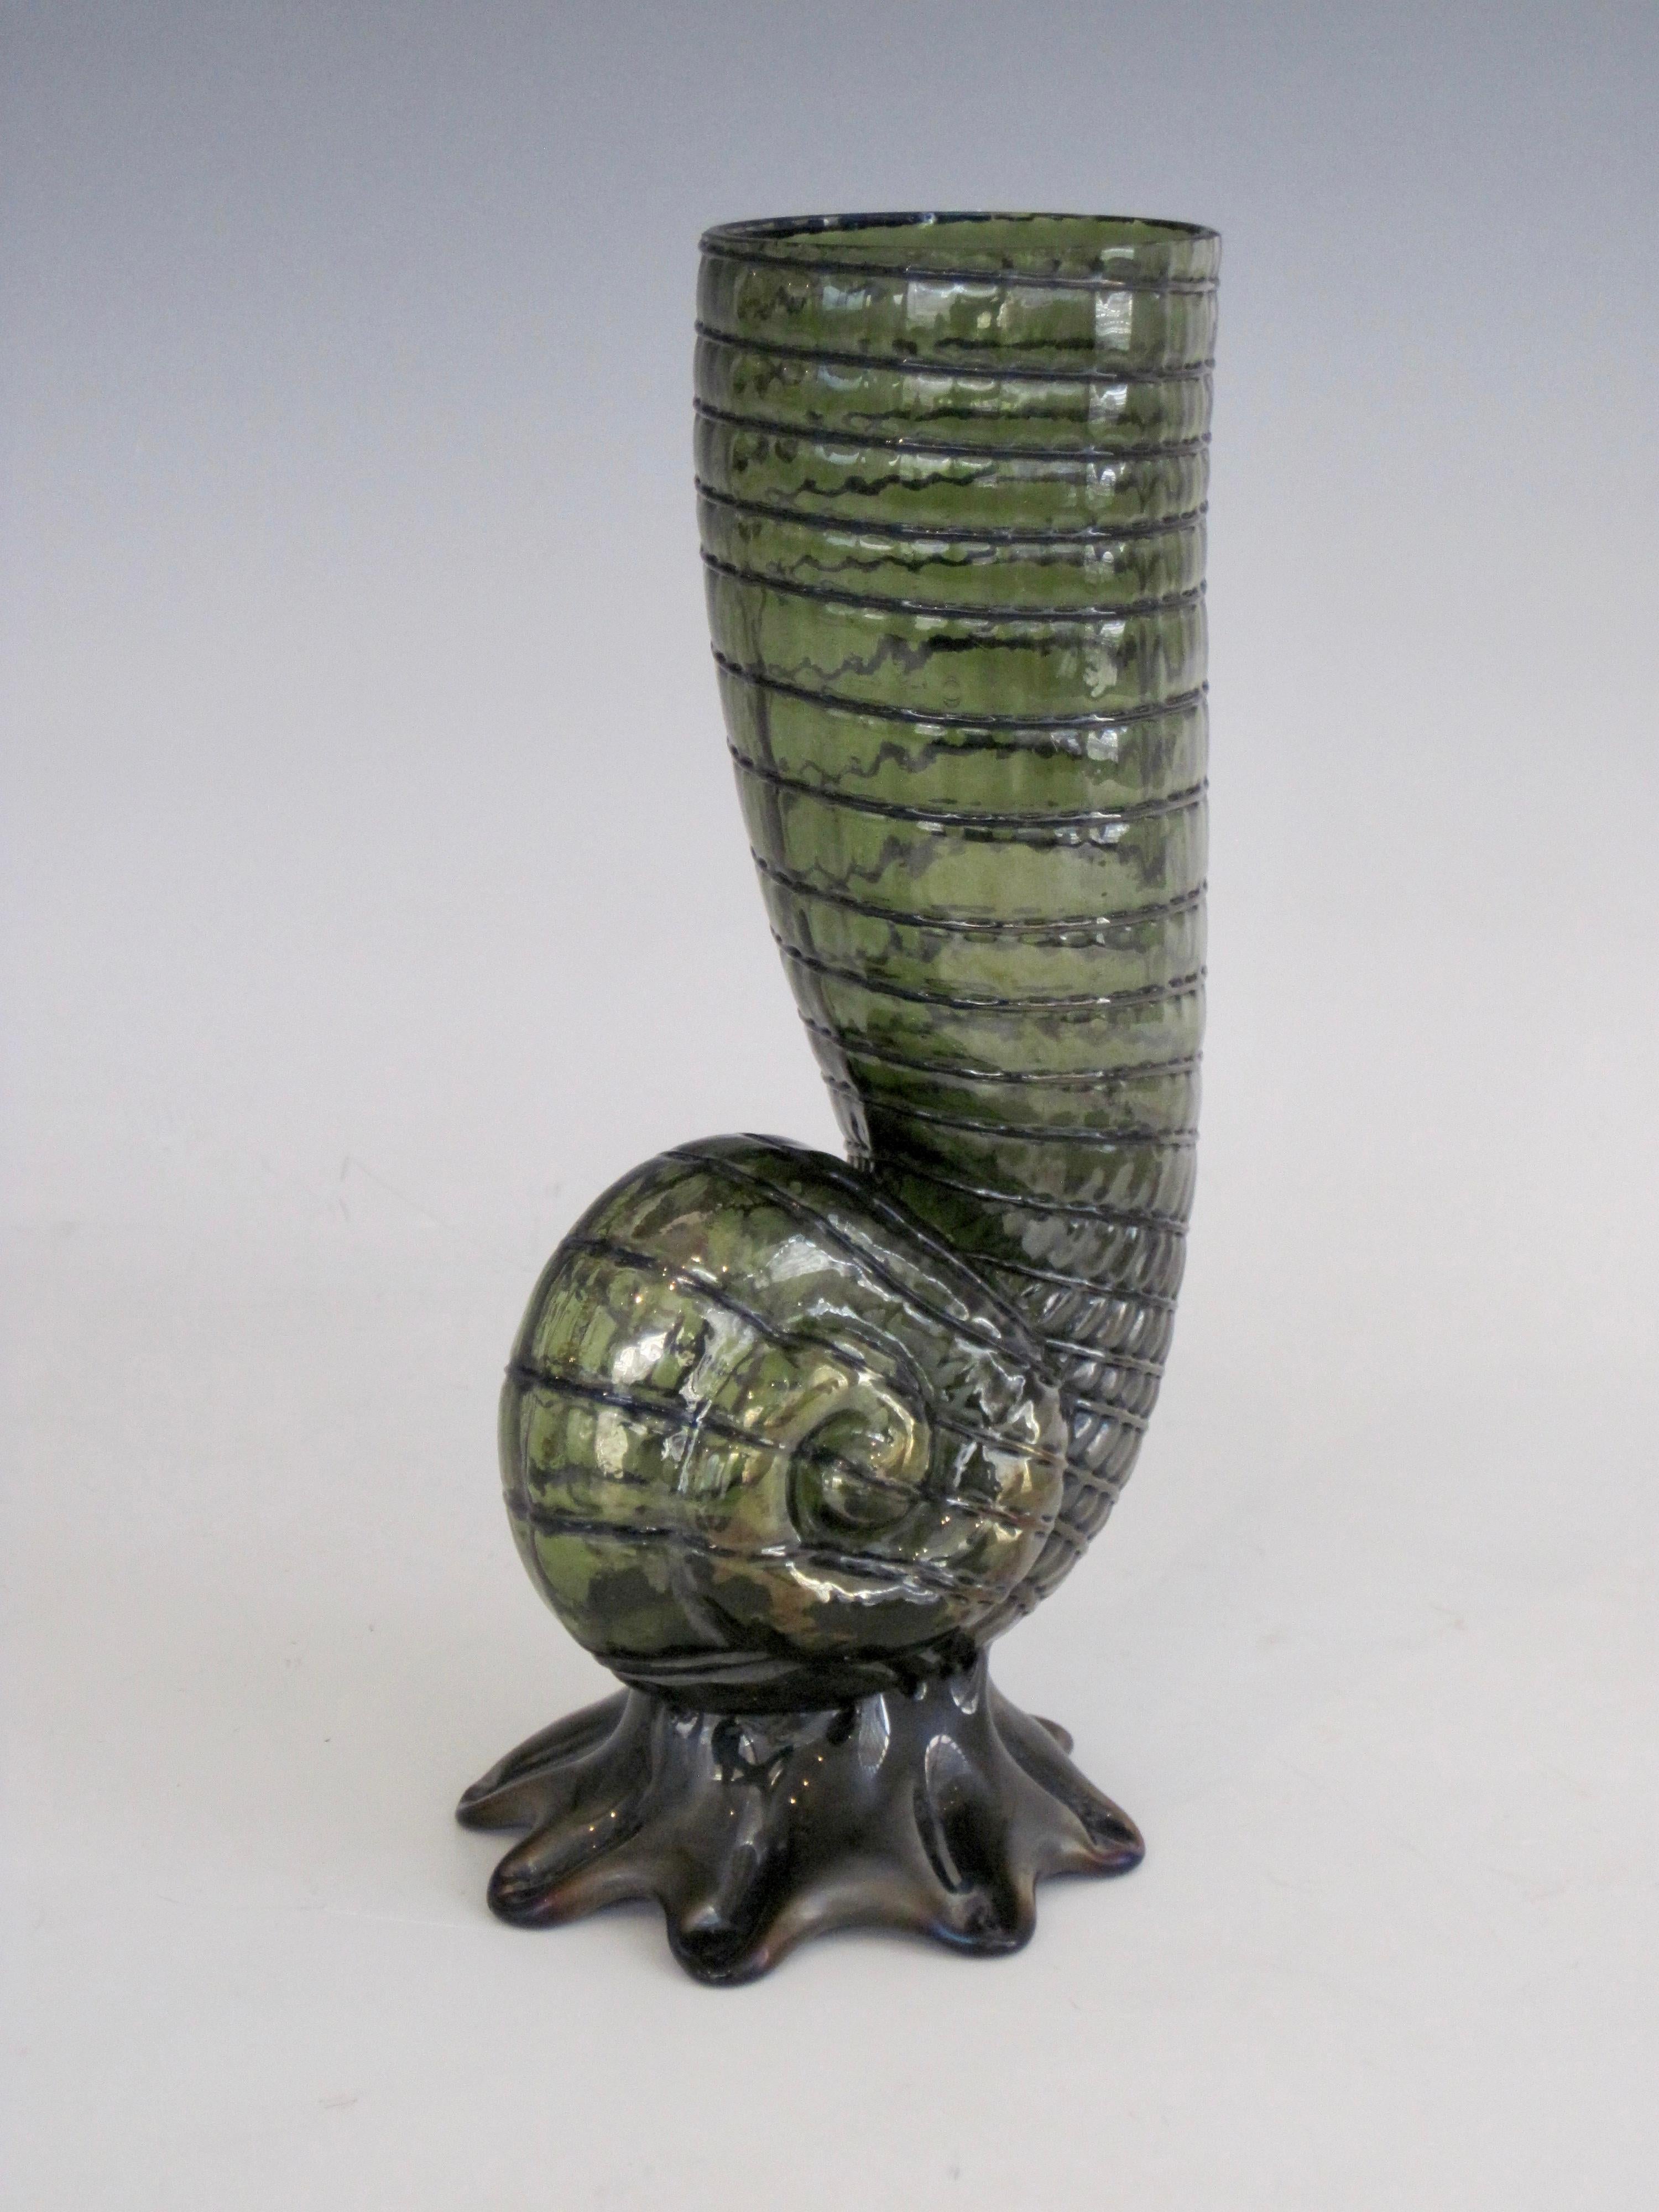 An Art Nouveau nautilus shell form flower bud vase by Loetz, Austria, circa 1900.

This hand blown elegant form in green art glass with thin blue-black stripes presents the feeling of upward movement. The blue-black foot gives the semi-transparent